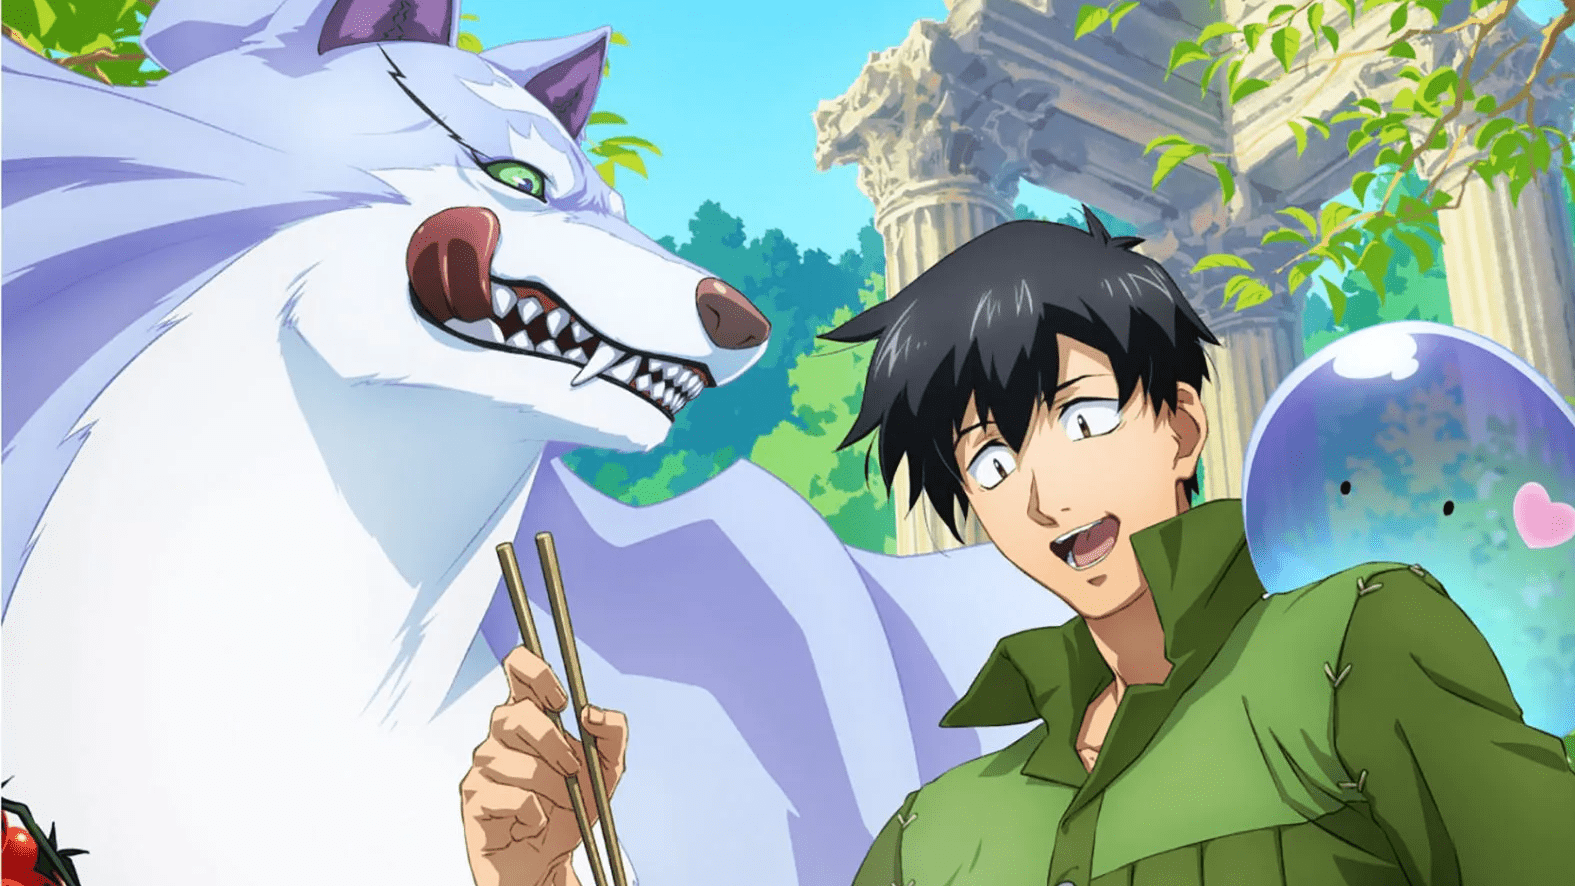 This season's fantasy anime is full of useful skills that don't require magic!